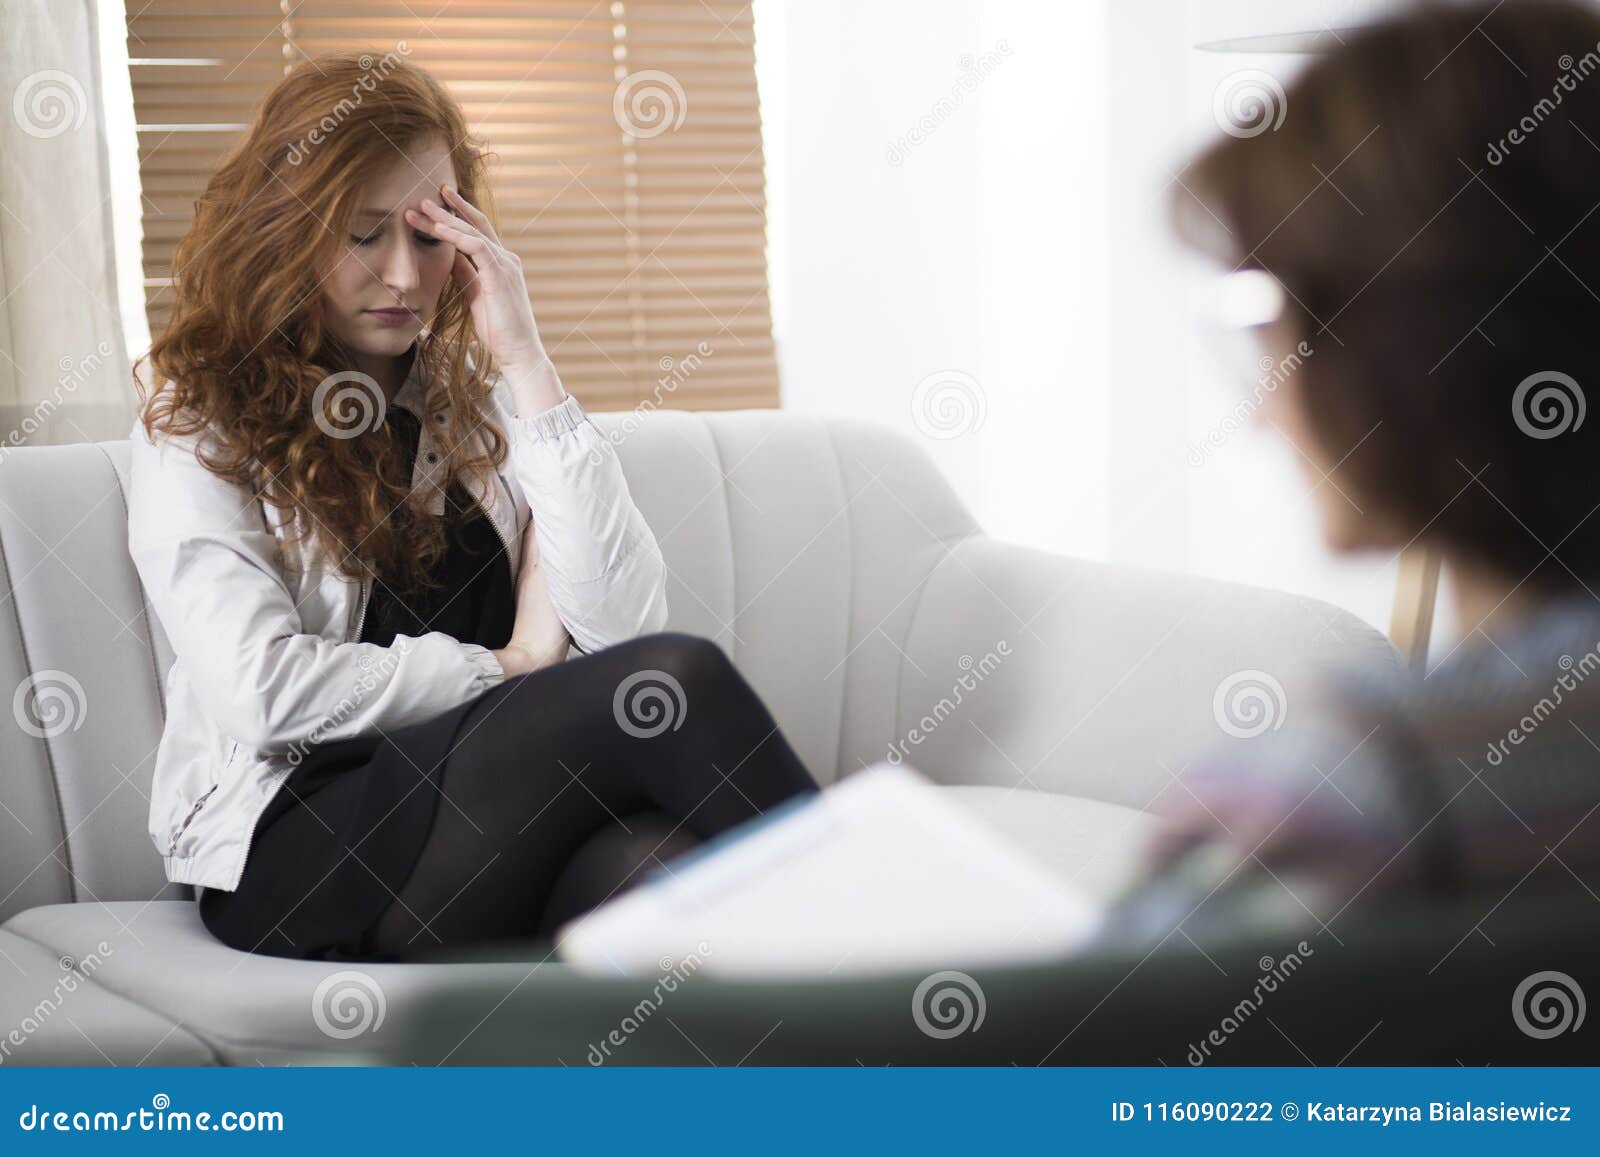 young depressed woman in psychotherapy